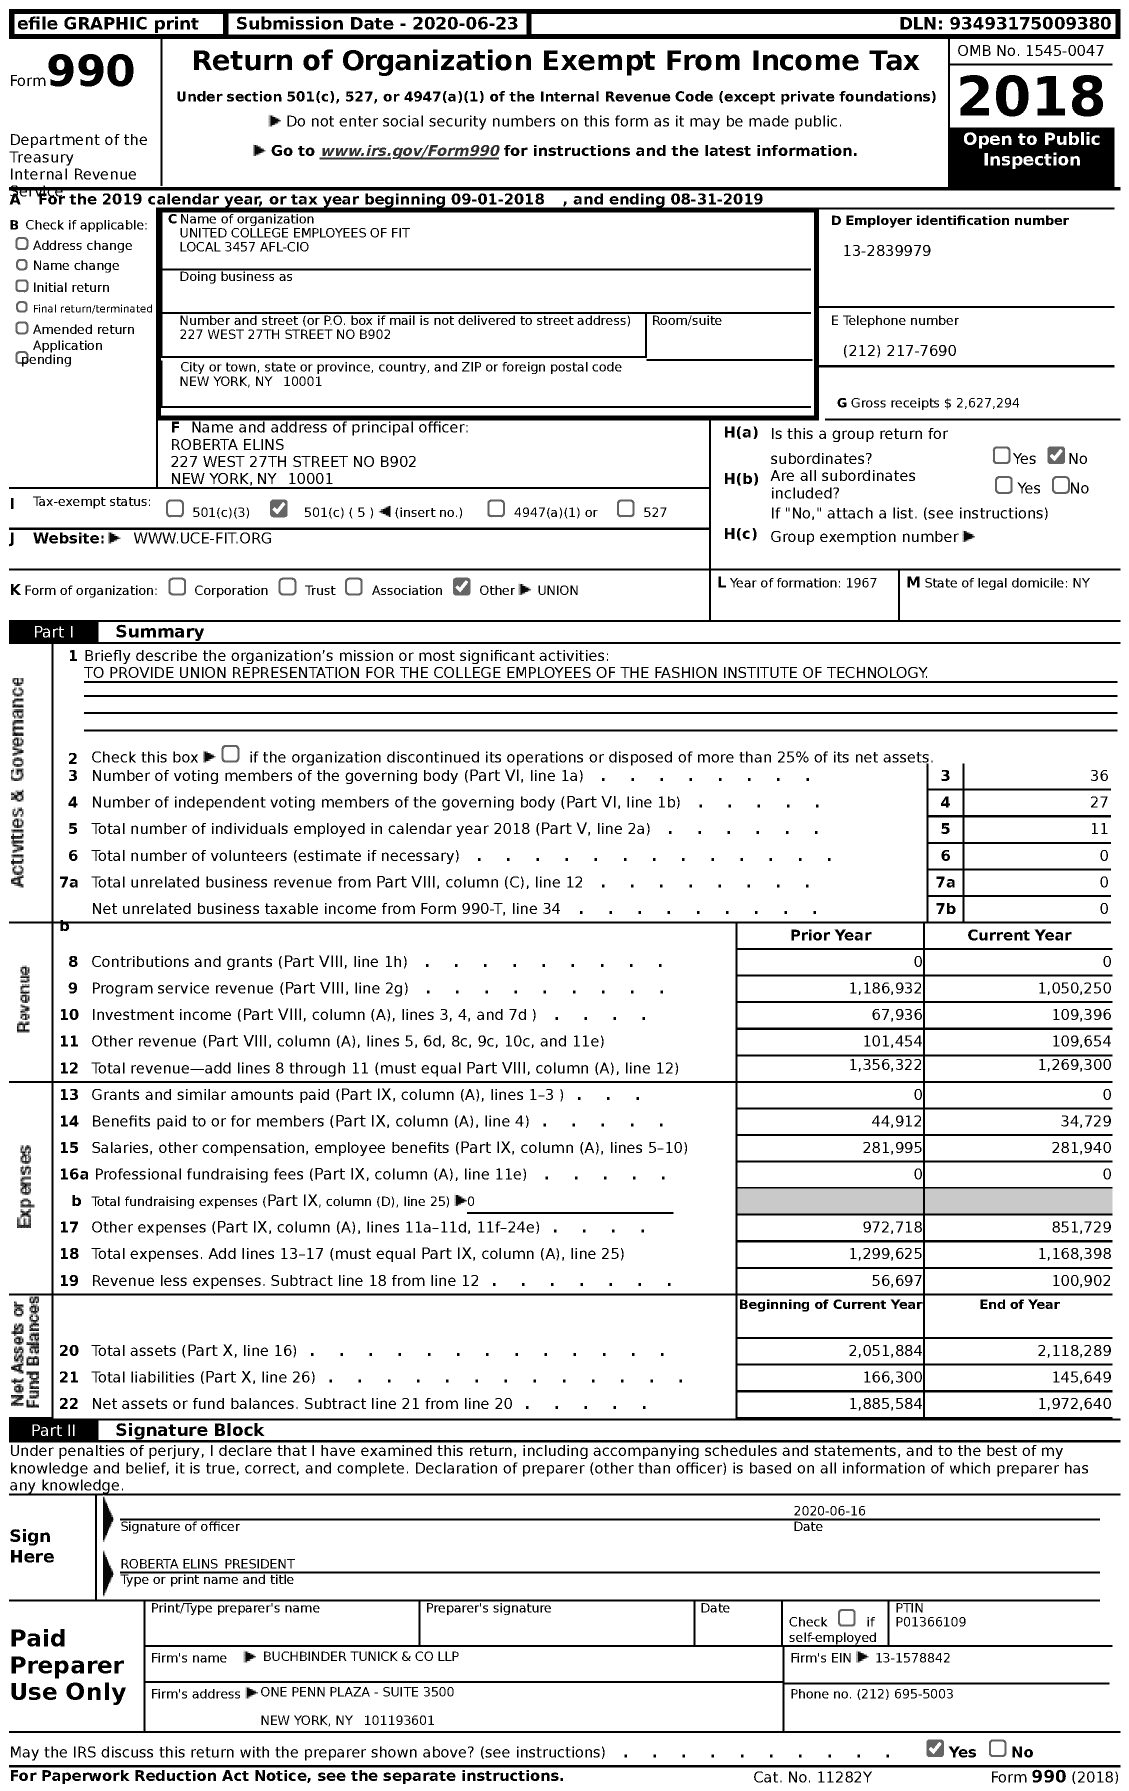 Image of first page of 2018 Form 990 for American Federation of Teachers - 3457 United College Employees of Fi